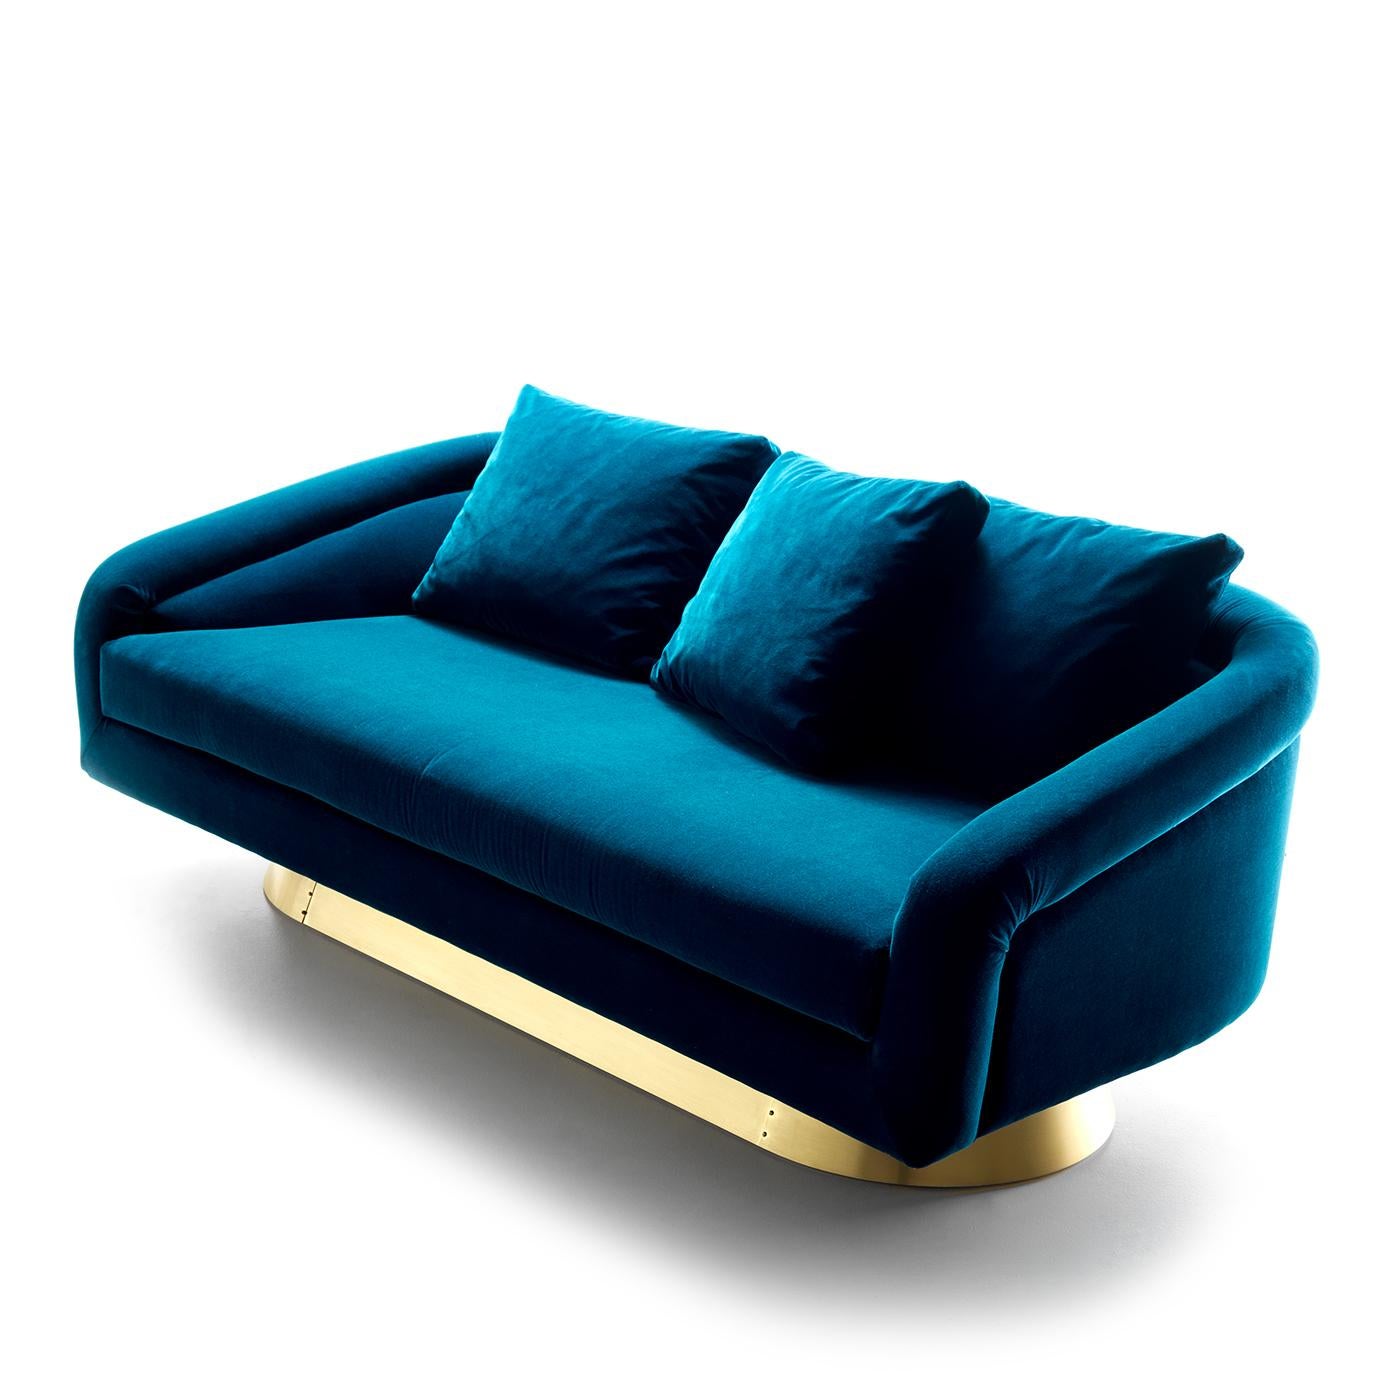 Inspired by the decadent aesthetic of the Art Deco, this stunning sofa will bring a dramatic look to a mid-century, modern living room. The unique silhouette is raised on an elongated oval brass plinth whose warm shimmer elegantly coordinates with